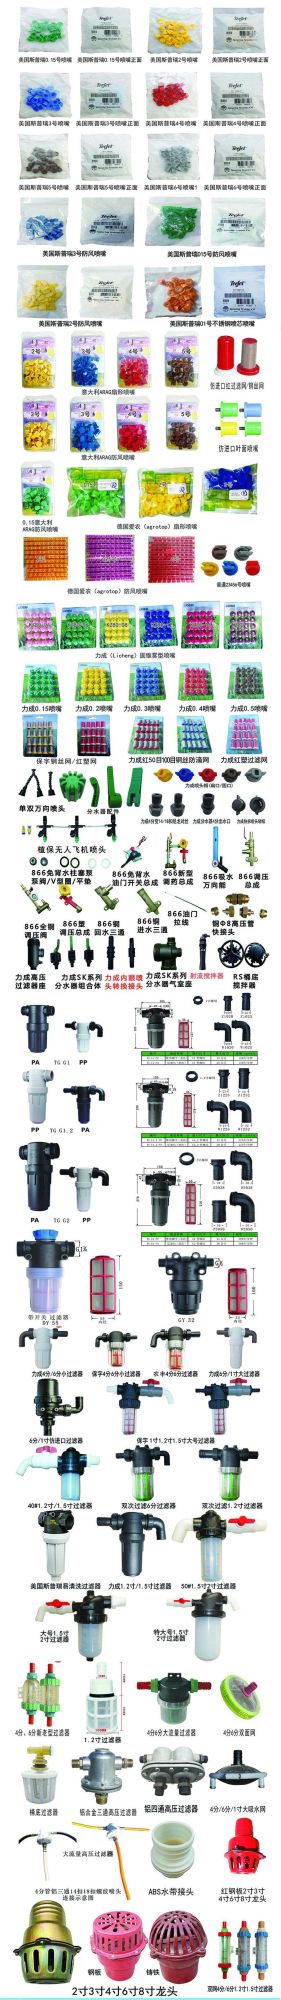 Pesticide Pressure Battery Sprayer Agricultural Pump Electric Power Hand Drones Misting Nozzle